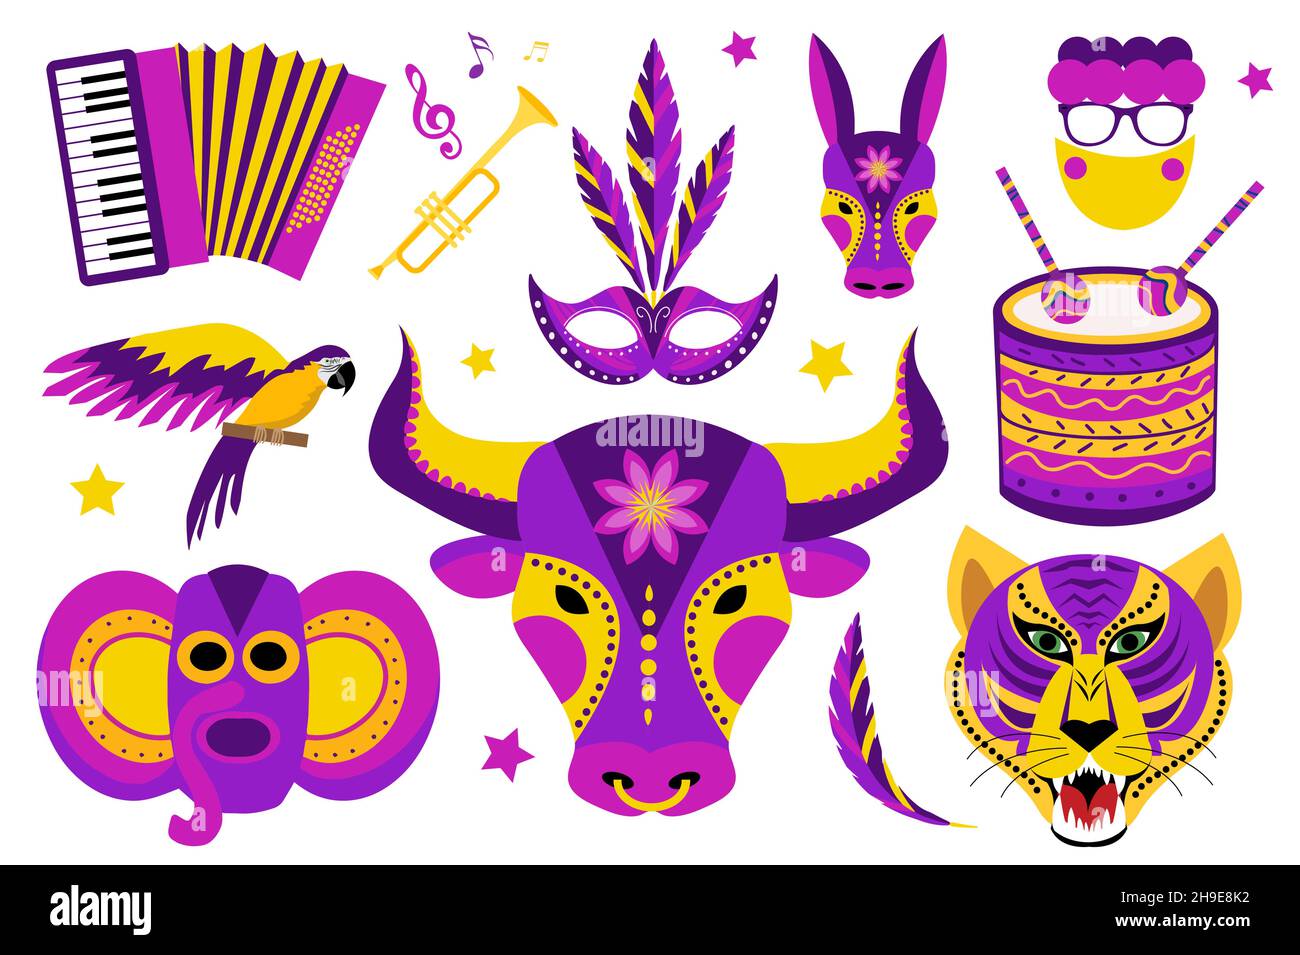 Barranquilla Carnival icons set. Colombian carnaval party collection of design elements with masks, button accordion, drum. For posters, flyers your Stock Vector